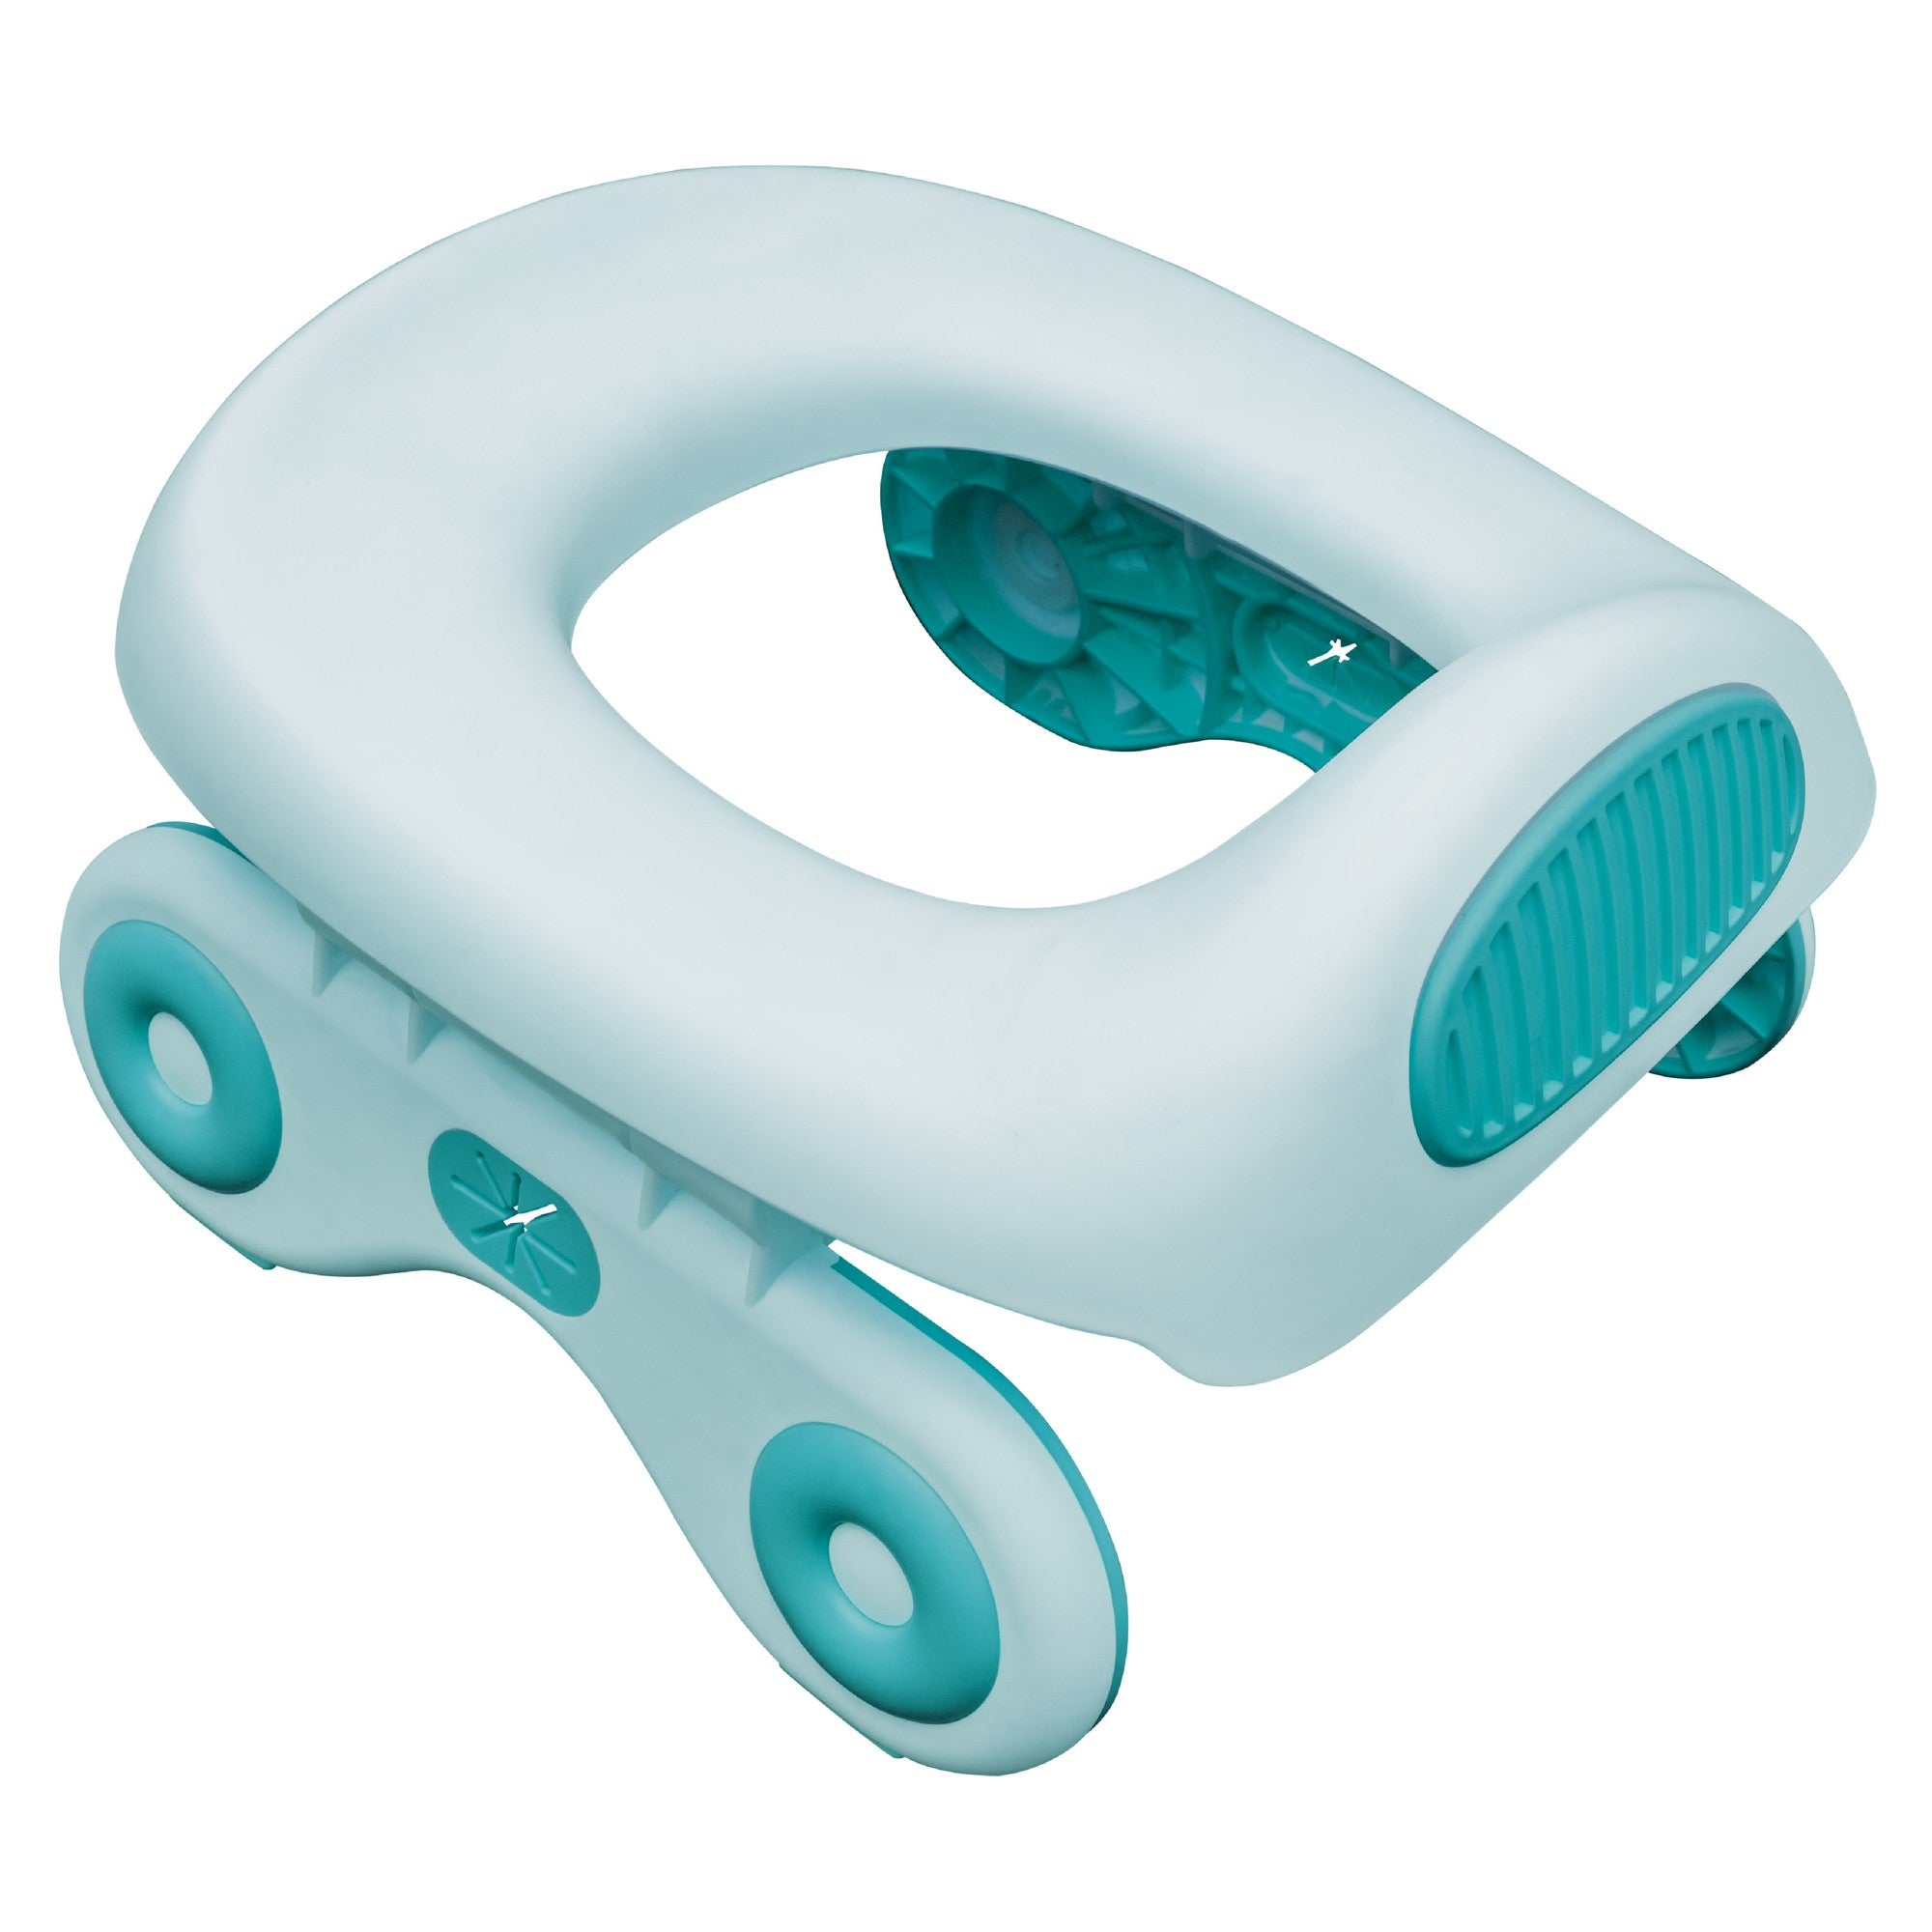 Moon Travel Baby Potty Seat Potty Training Teal 18 to 36 Months